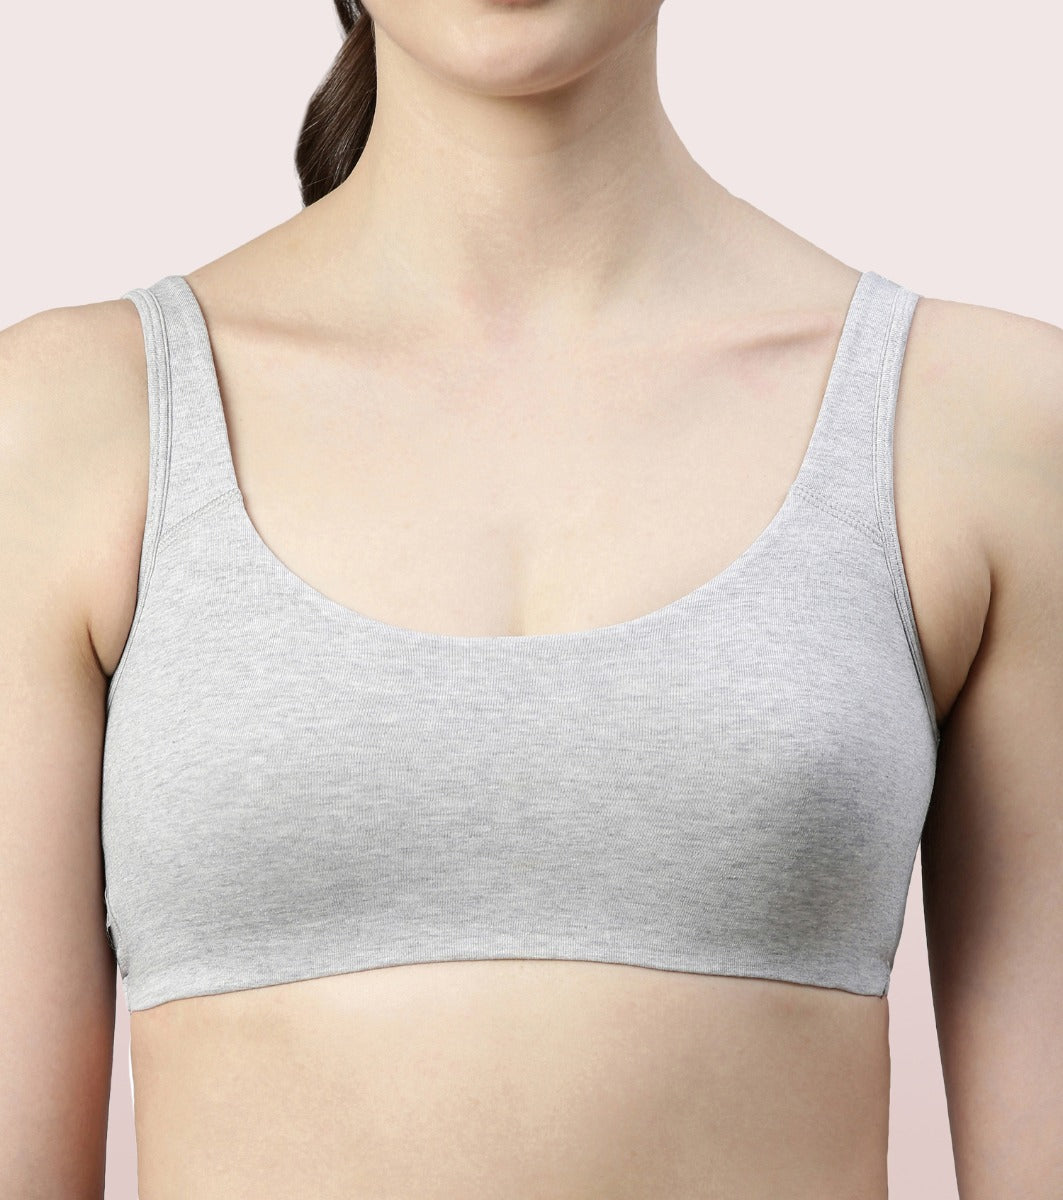 Enamor Low Impact Cotton Bra For Women - Non-Padded, Non-Wired, High-Coverage Bra For All-Day Comfort | SB06